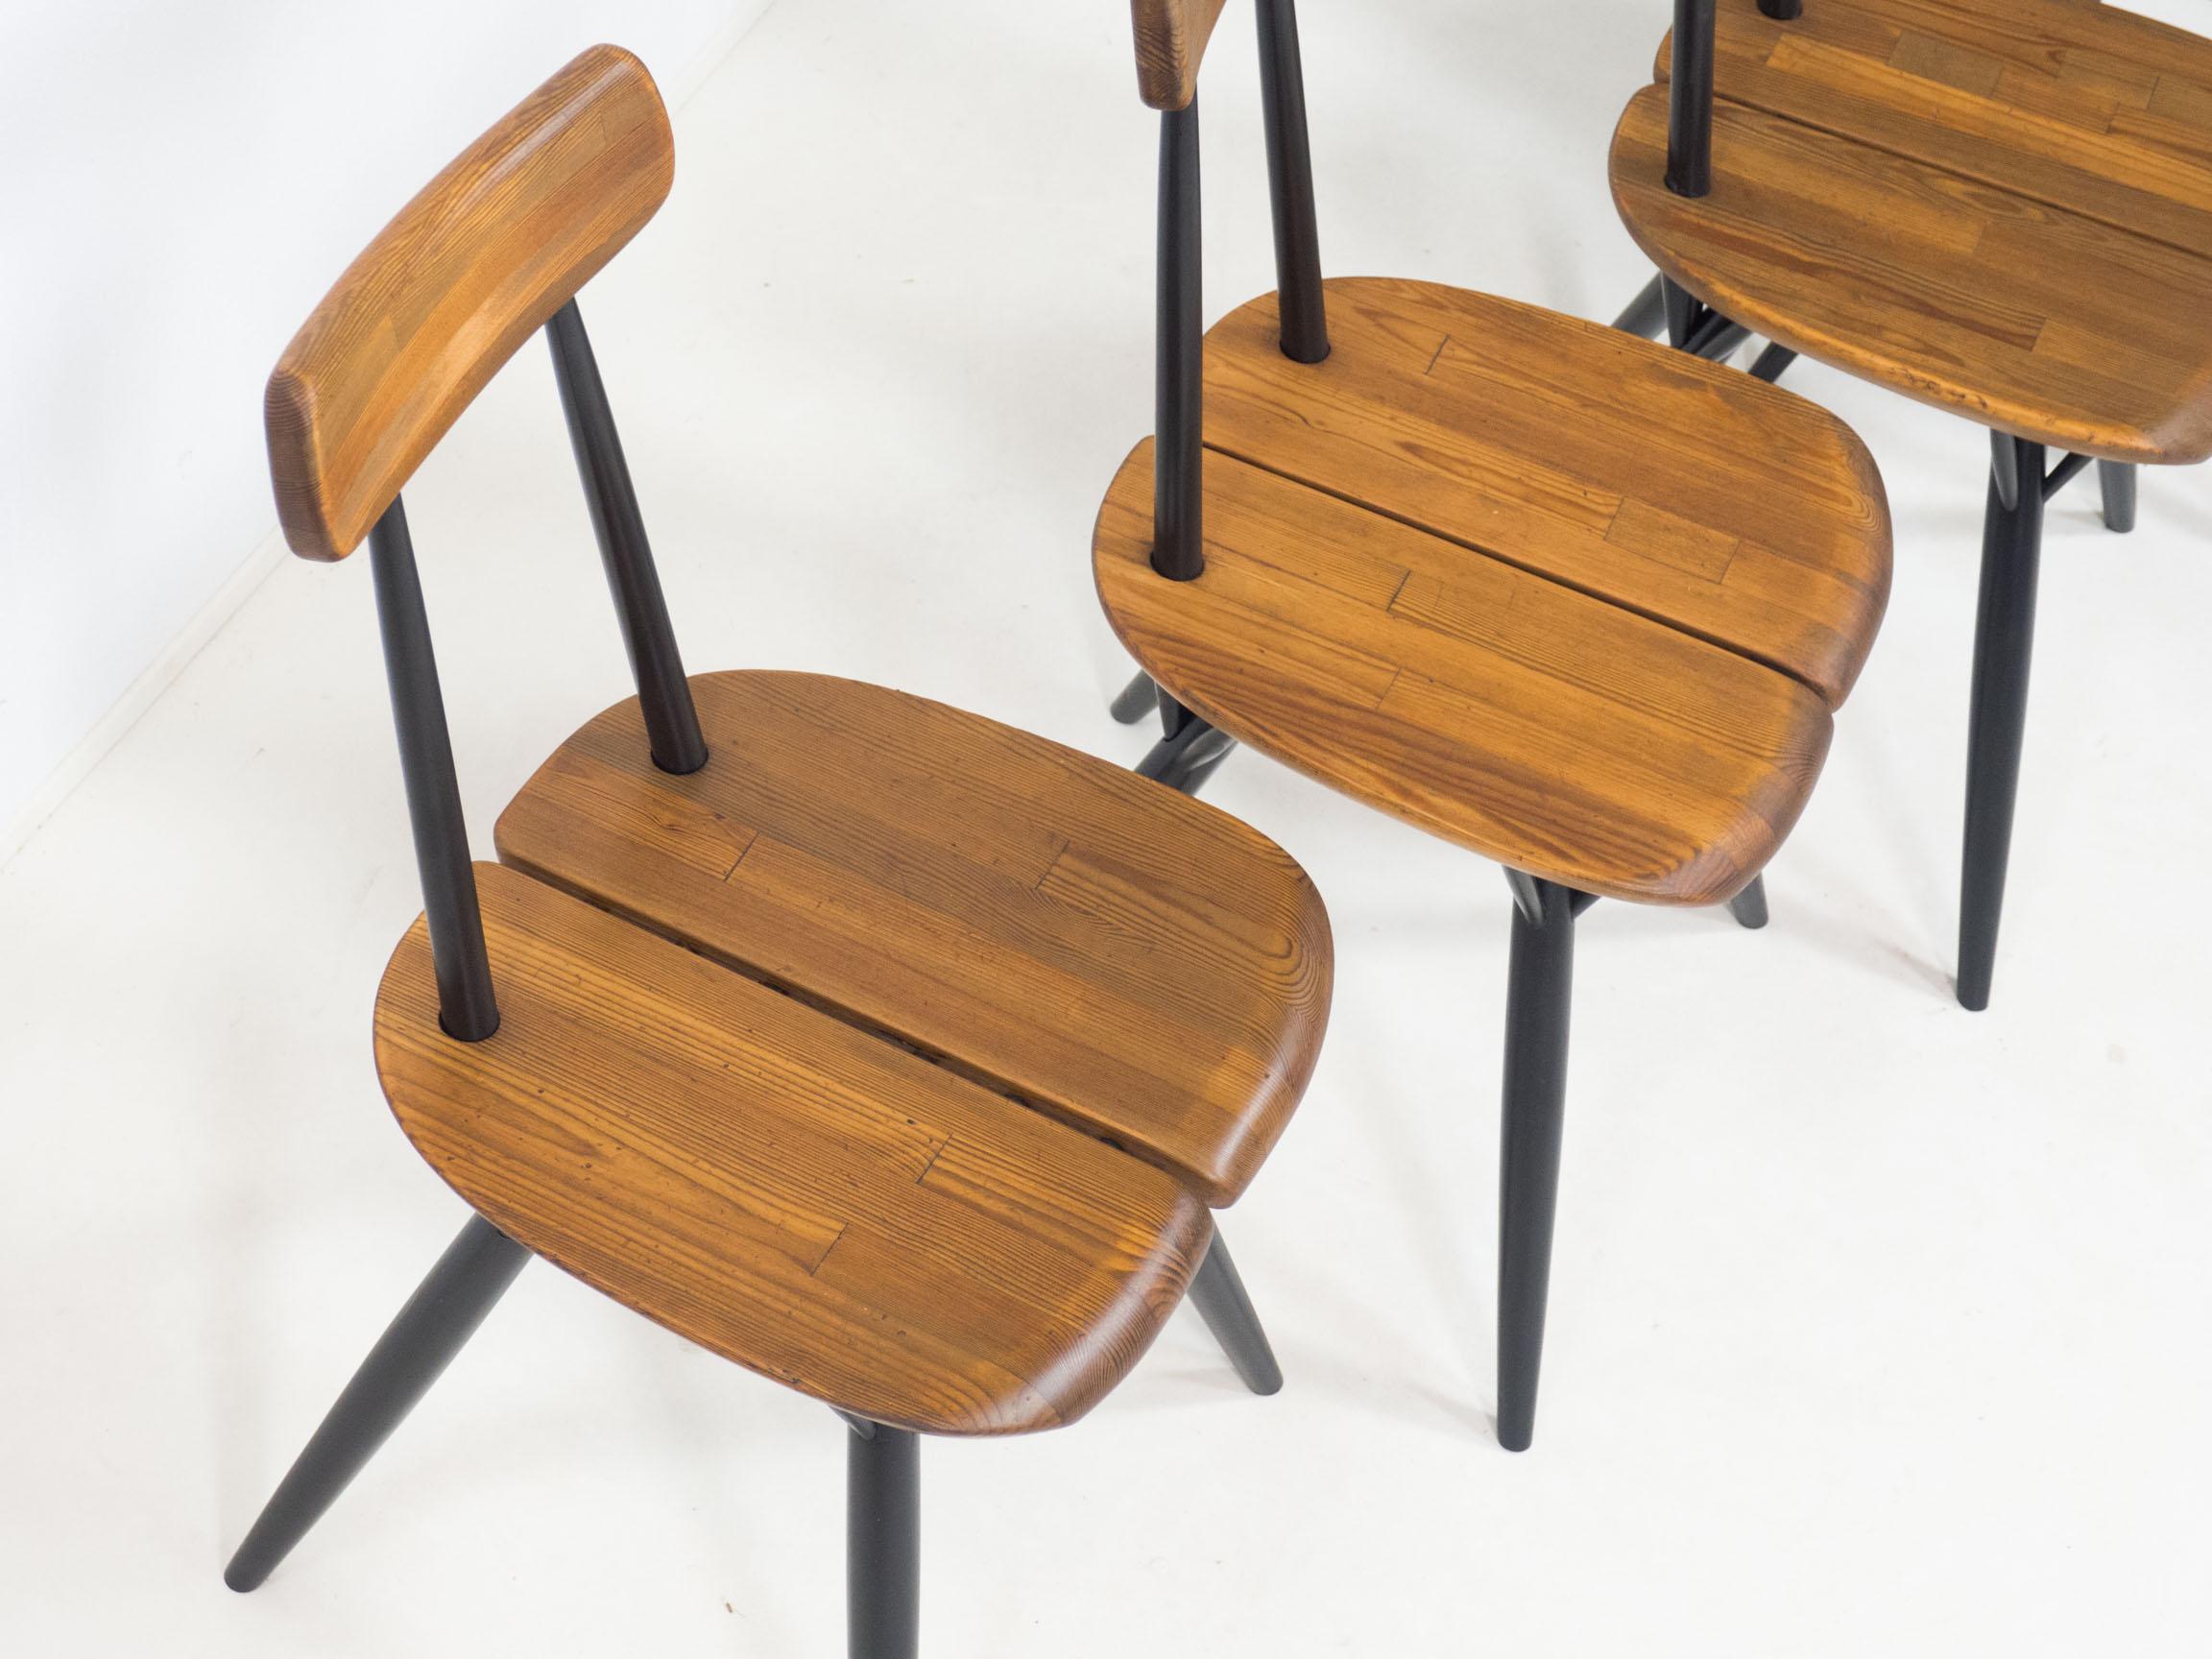 Set of four early Pirkka chairs designed by Ilmari Tapiovaara and manufactured by Laukaan Puu of Finlad in the 1950s.

These chairs are an iconic design and have seats and back rests made from several pieces of solid pine. The legs and back spokes